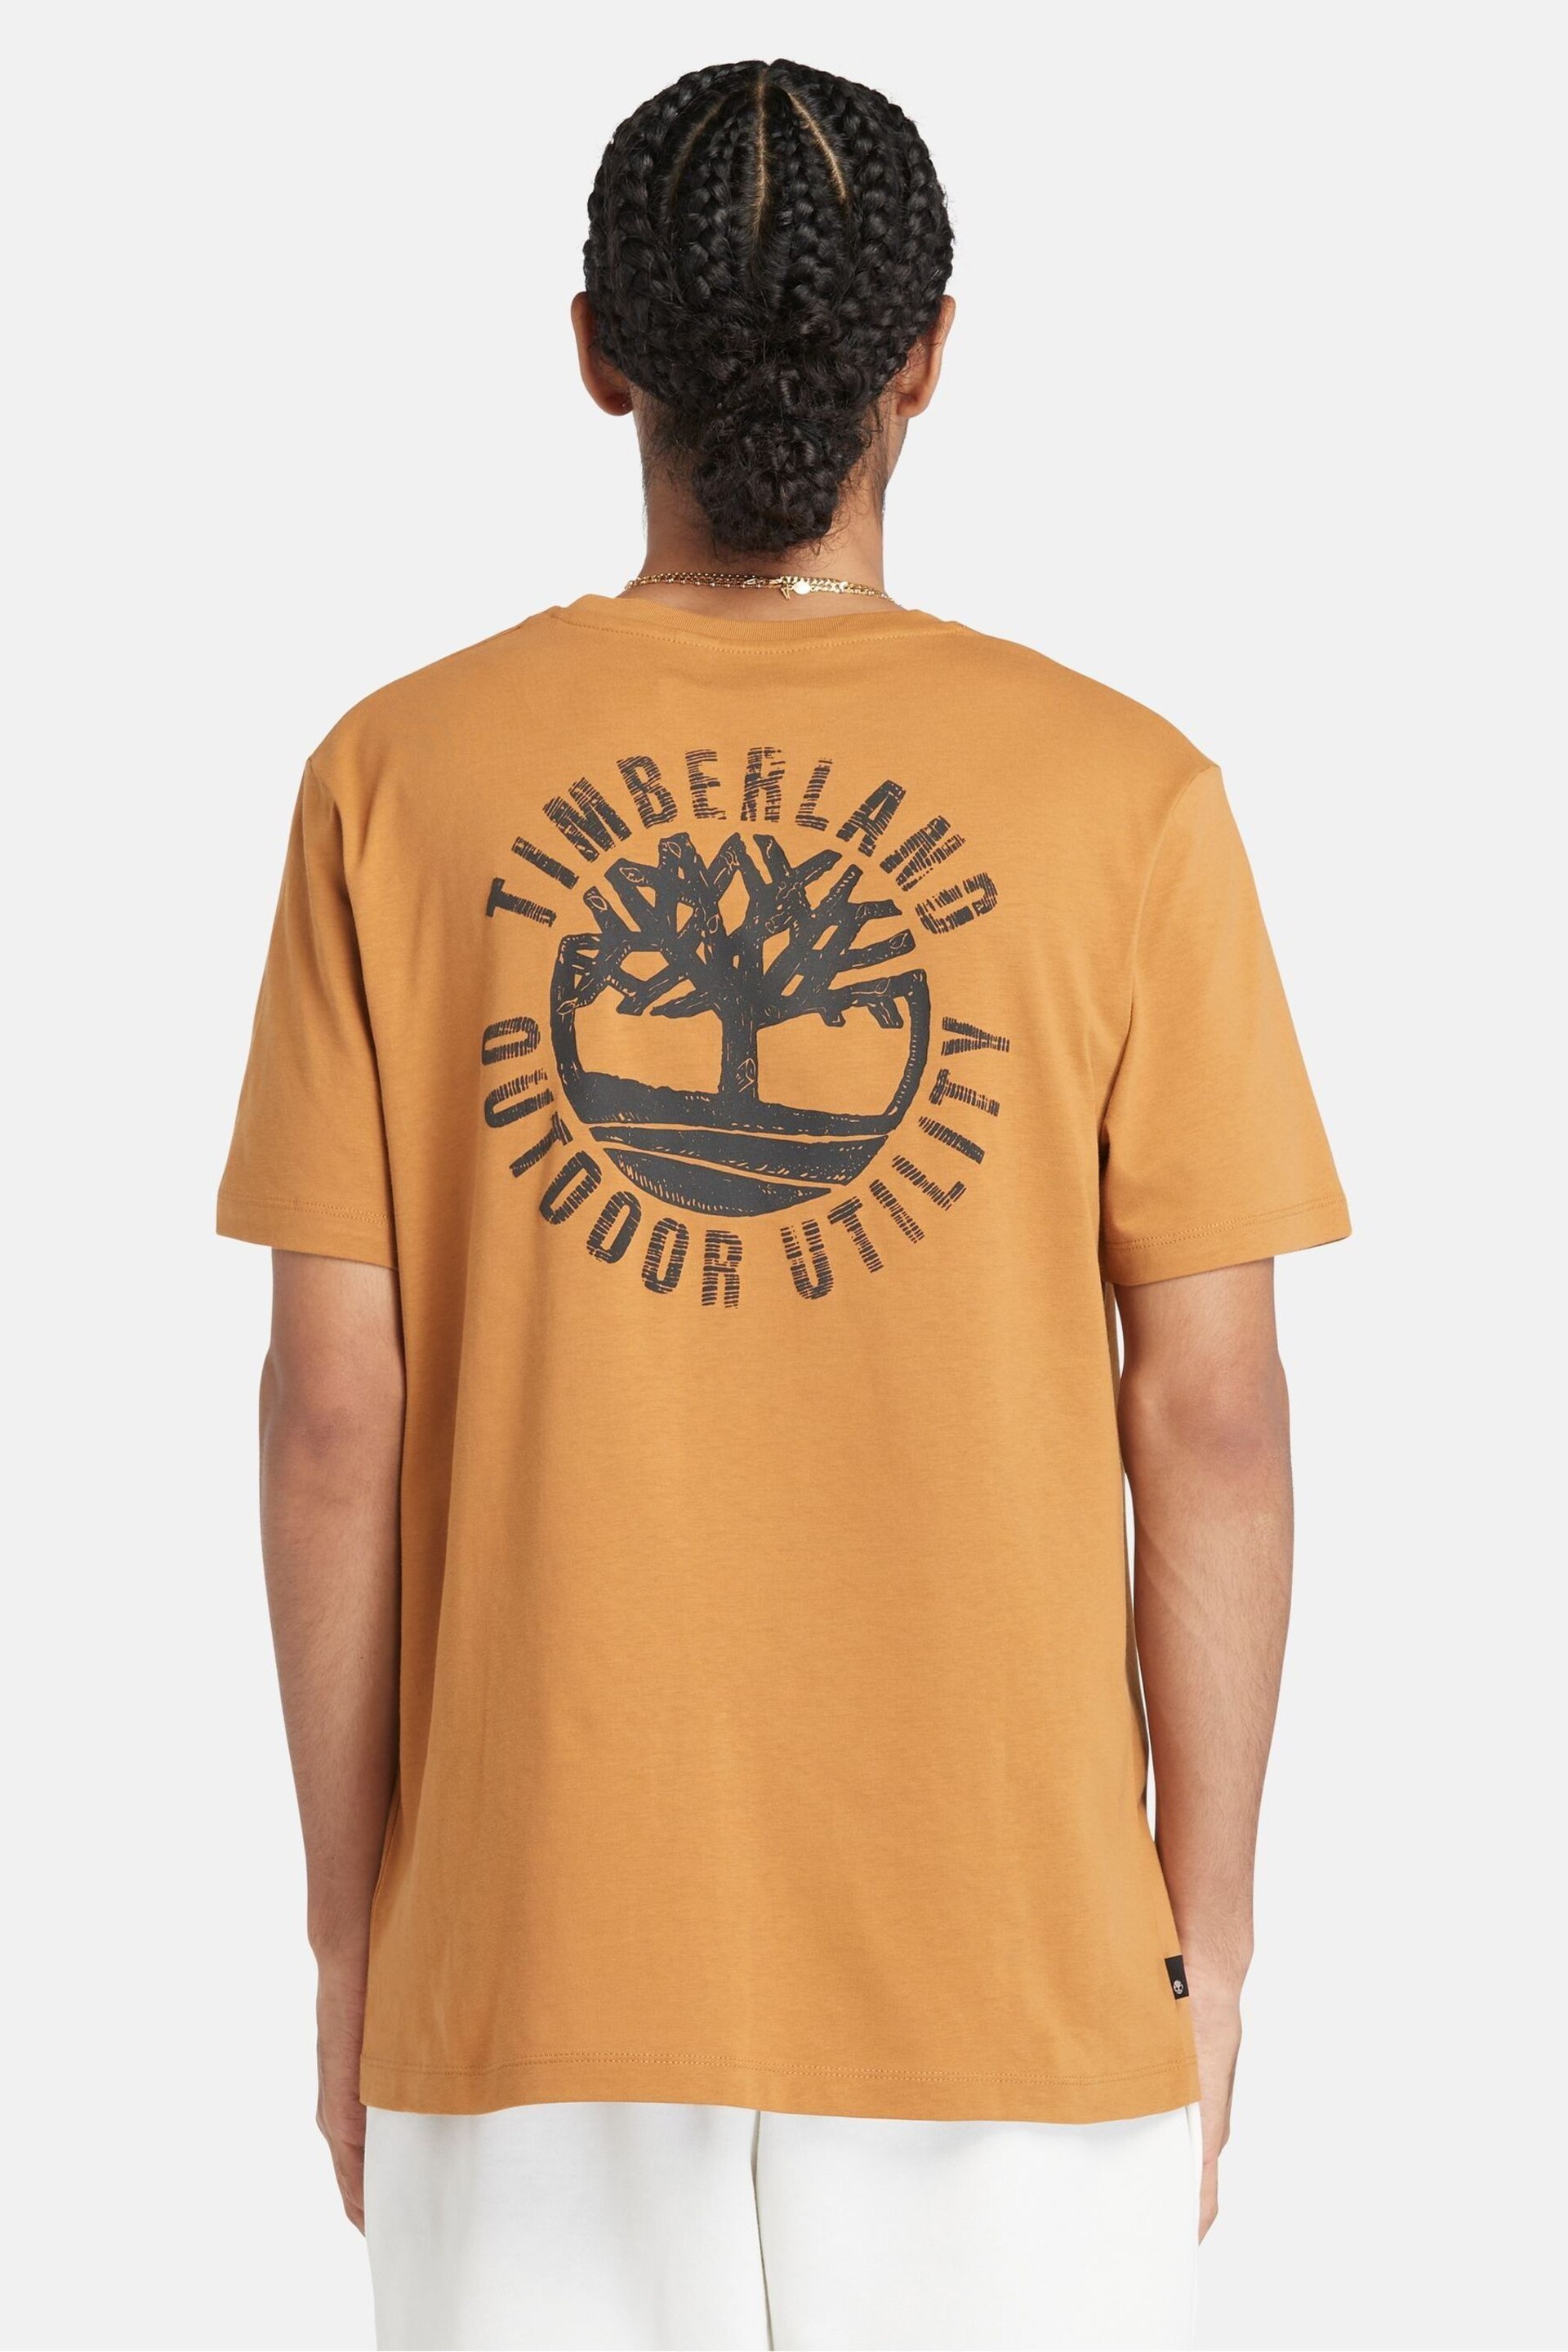 Timberland Short Sleeve Back Logo Graphic Brown T-Shirt - Image 2 of 5